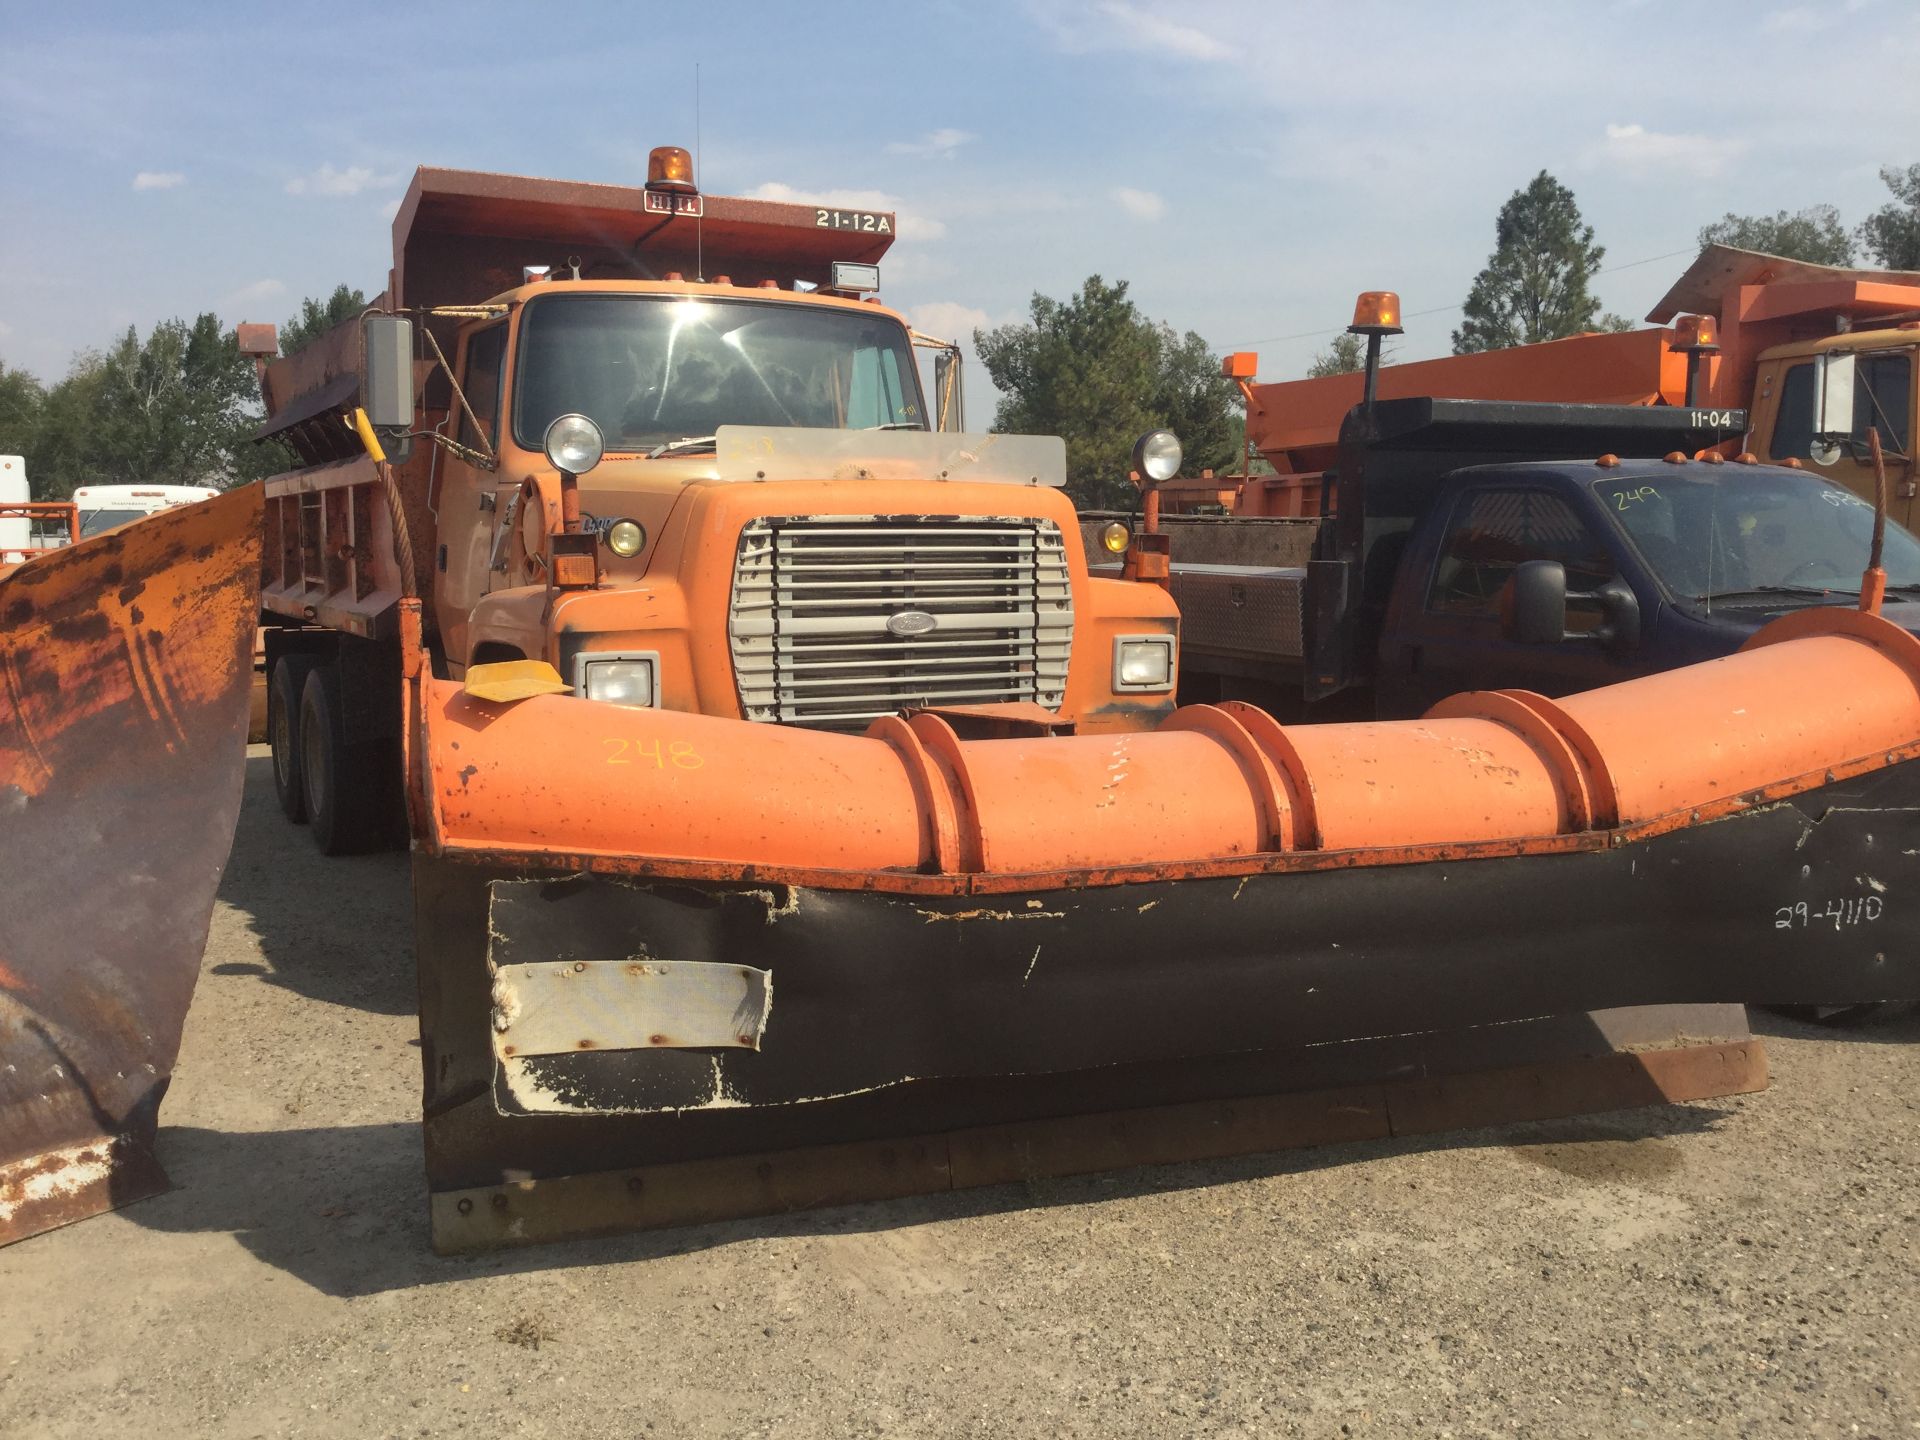 Year: 1992 Make: Ford Model: L9000 Type: Dump Truck Vin#: A33752 Mileage/Hours: 378271 L10 Cummins - Image 3 of 6